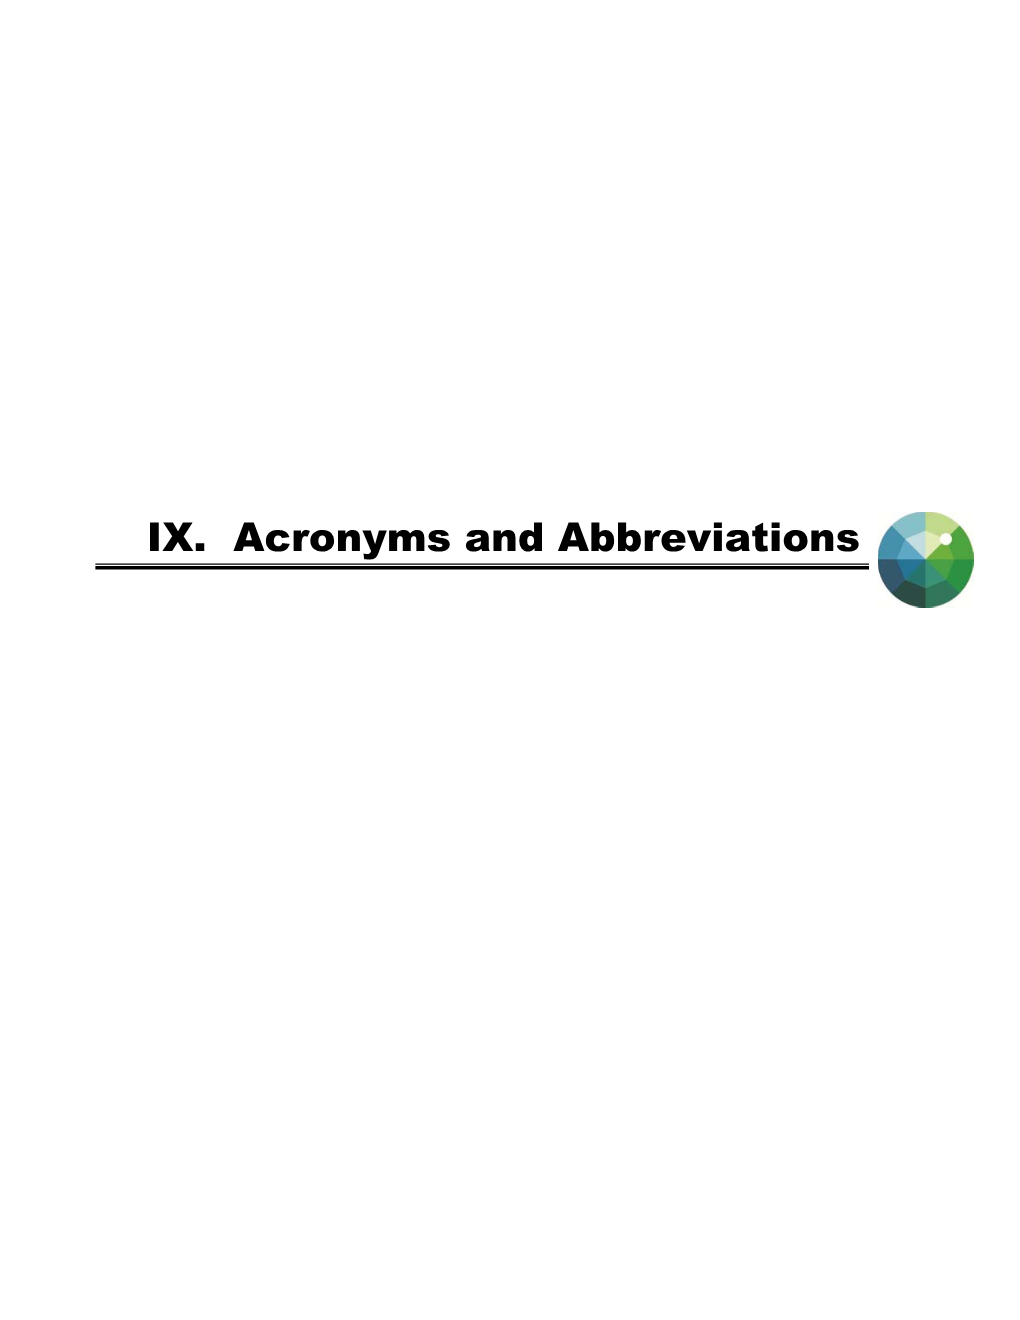 IX. Acronyms and Abbreviations